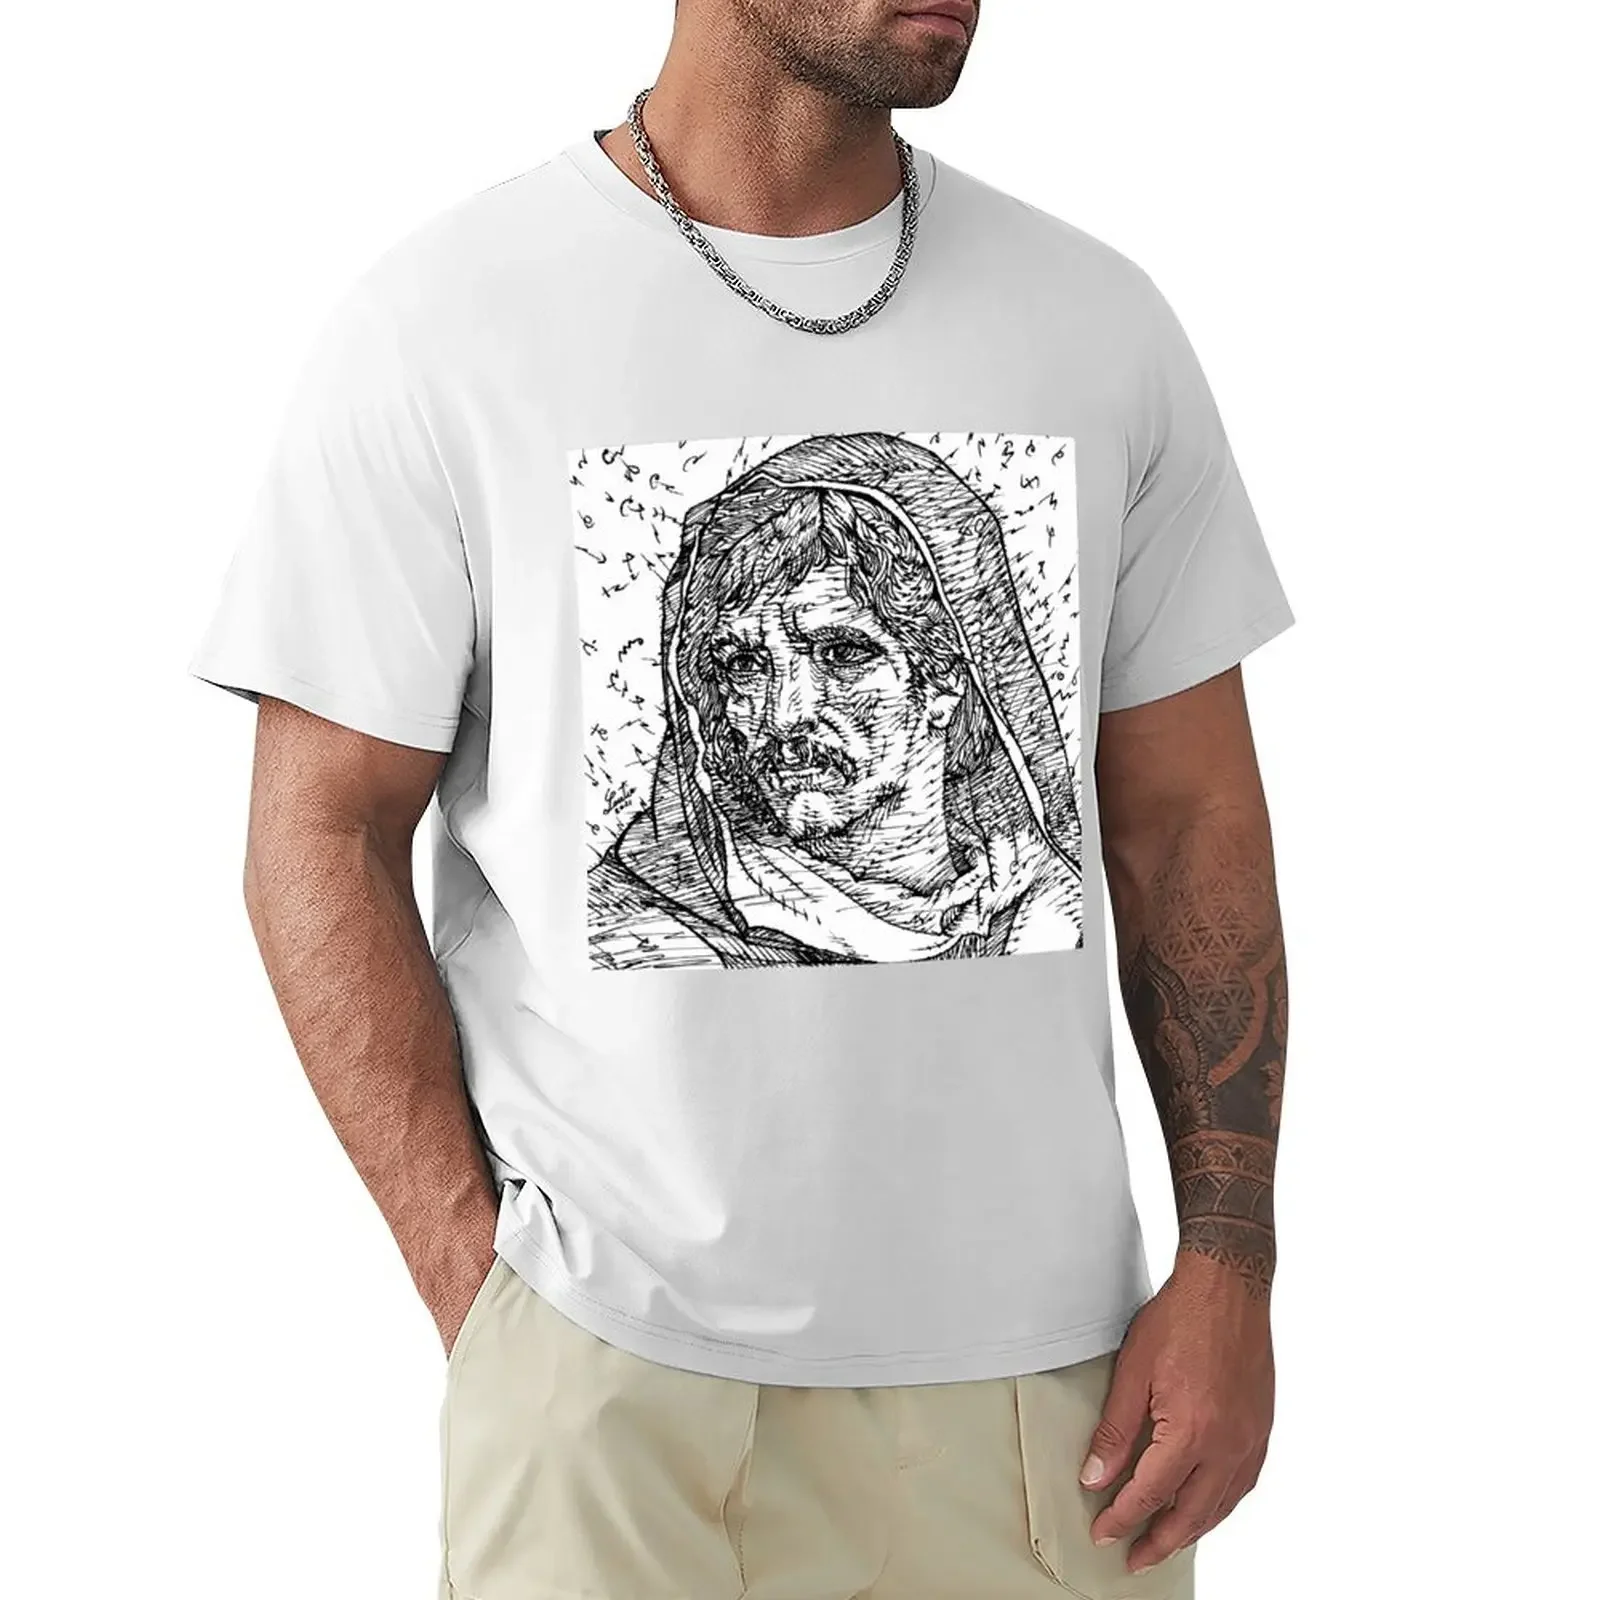 GIORDANO BRUNO ink portrait T-shirt customs design your own new edition hippie clothes Men's t shirts